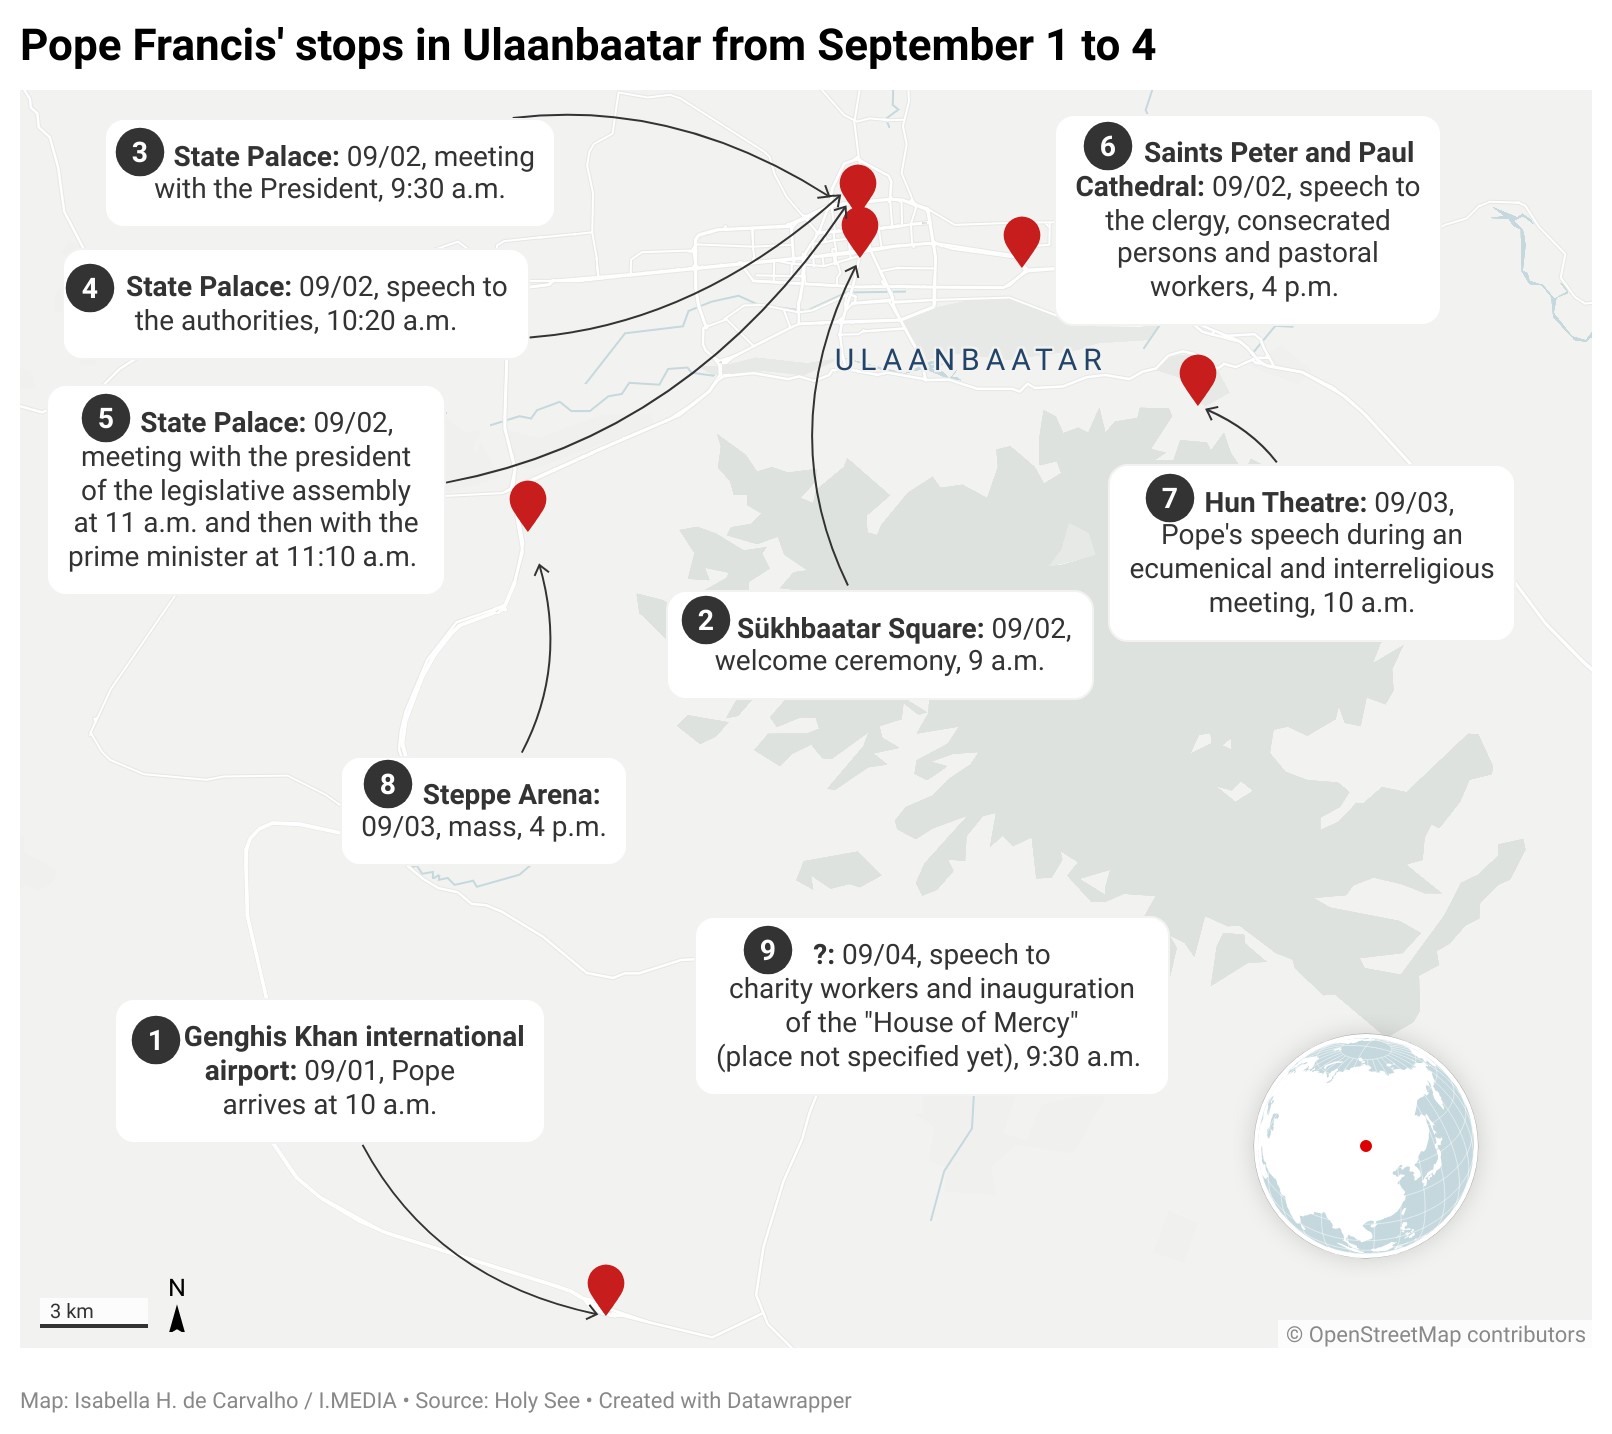 A map showing Pope Francis' stops during his trip to Ulaanbaatar in Mongolia